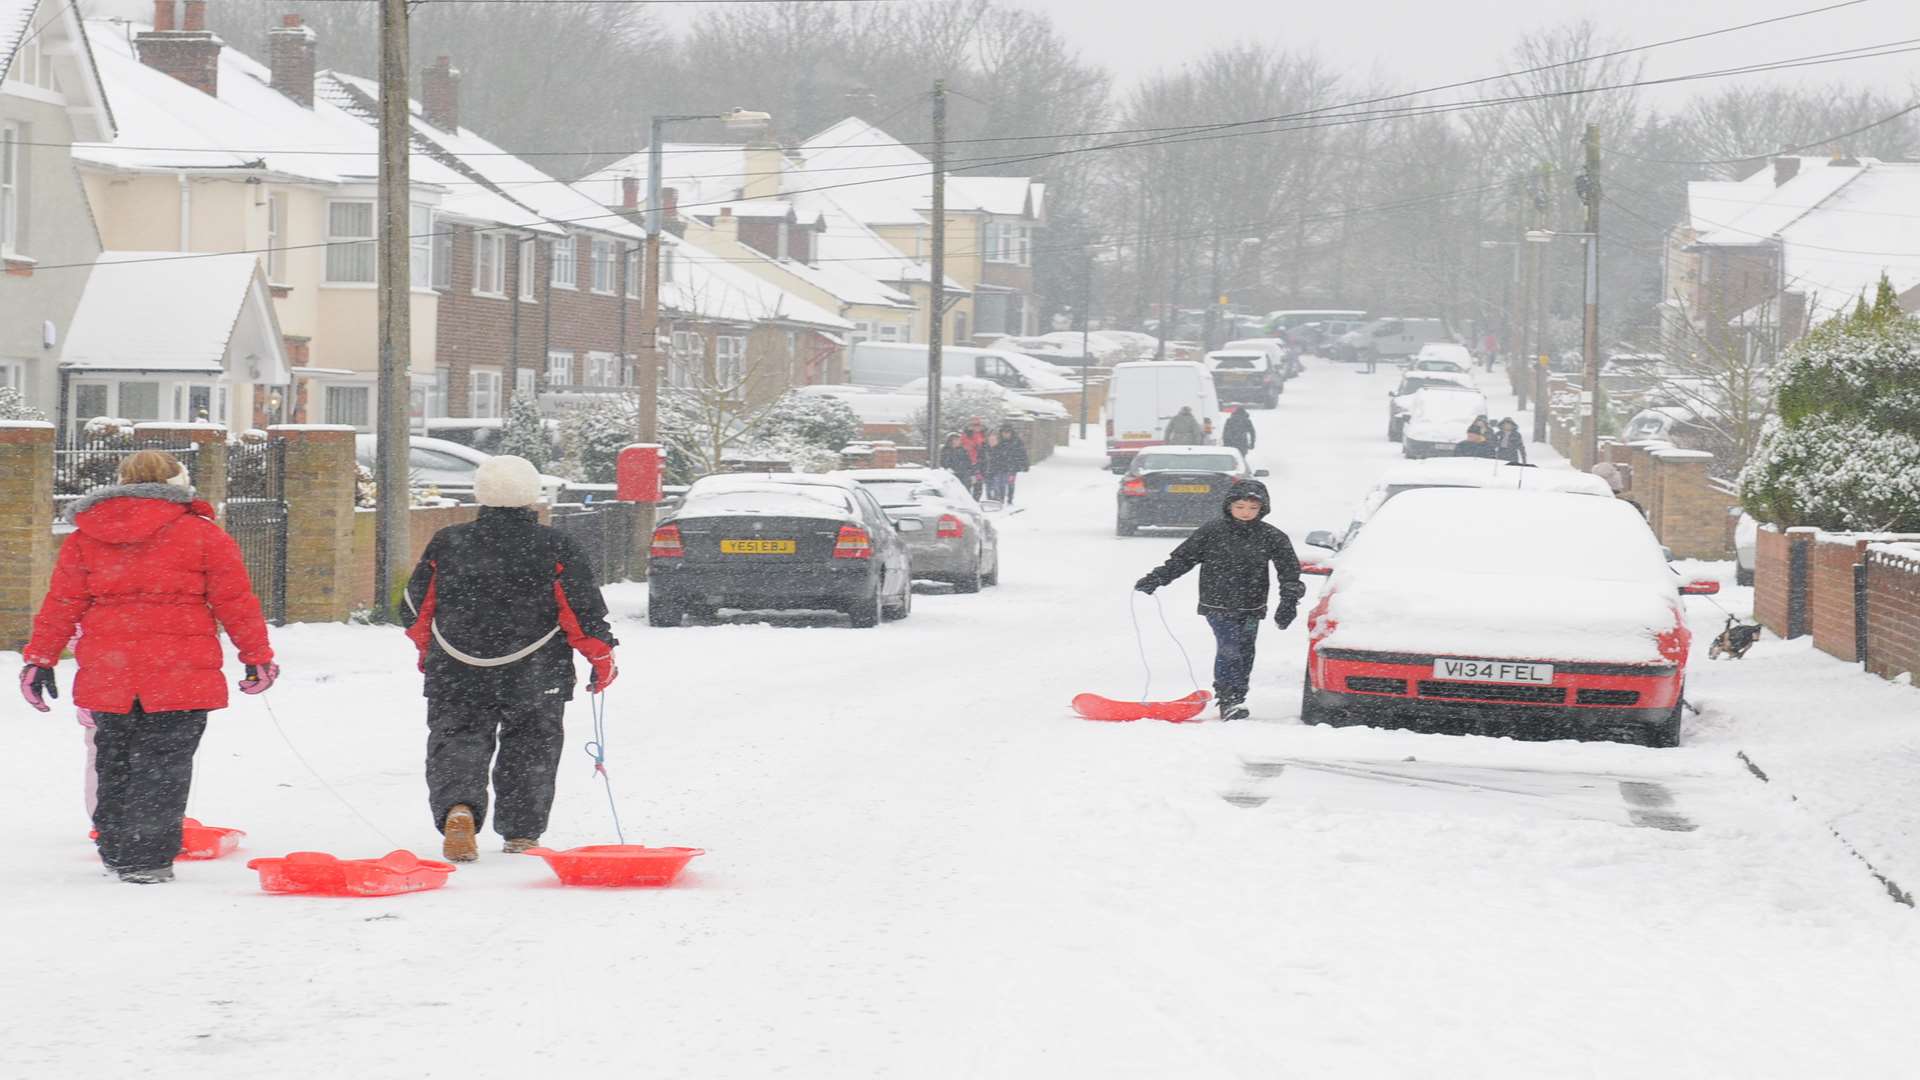 King Arthurs Drive, Strood during snowfall in 2013. Stock image